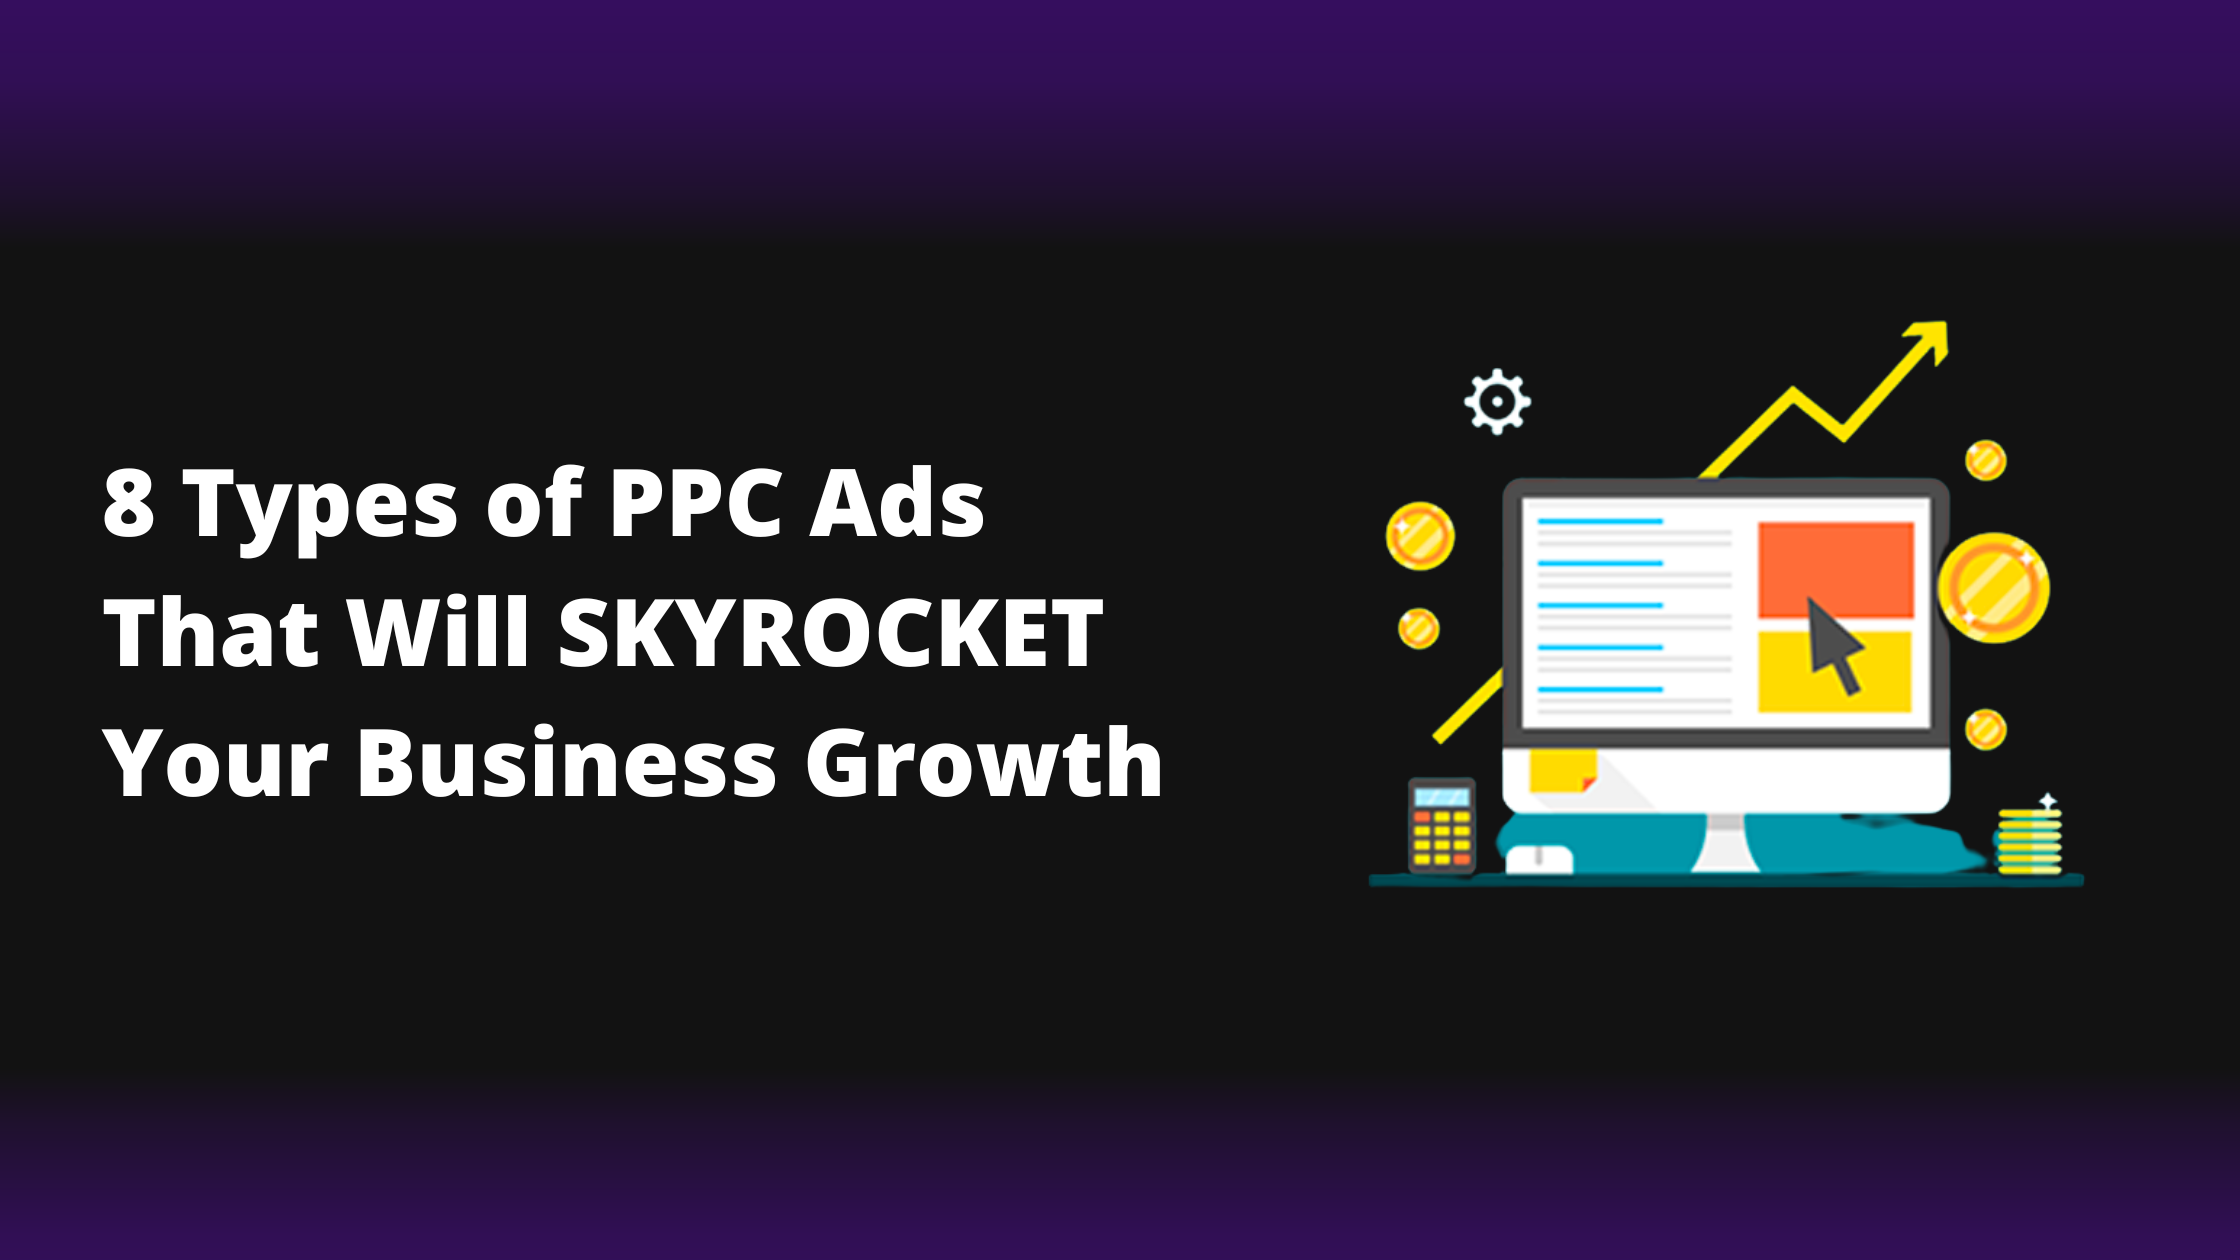 8 Types Of PPC Ads That Will Skyrocket Your Business Growth